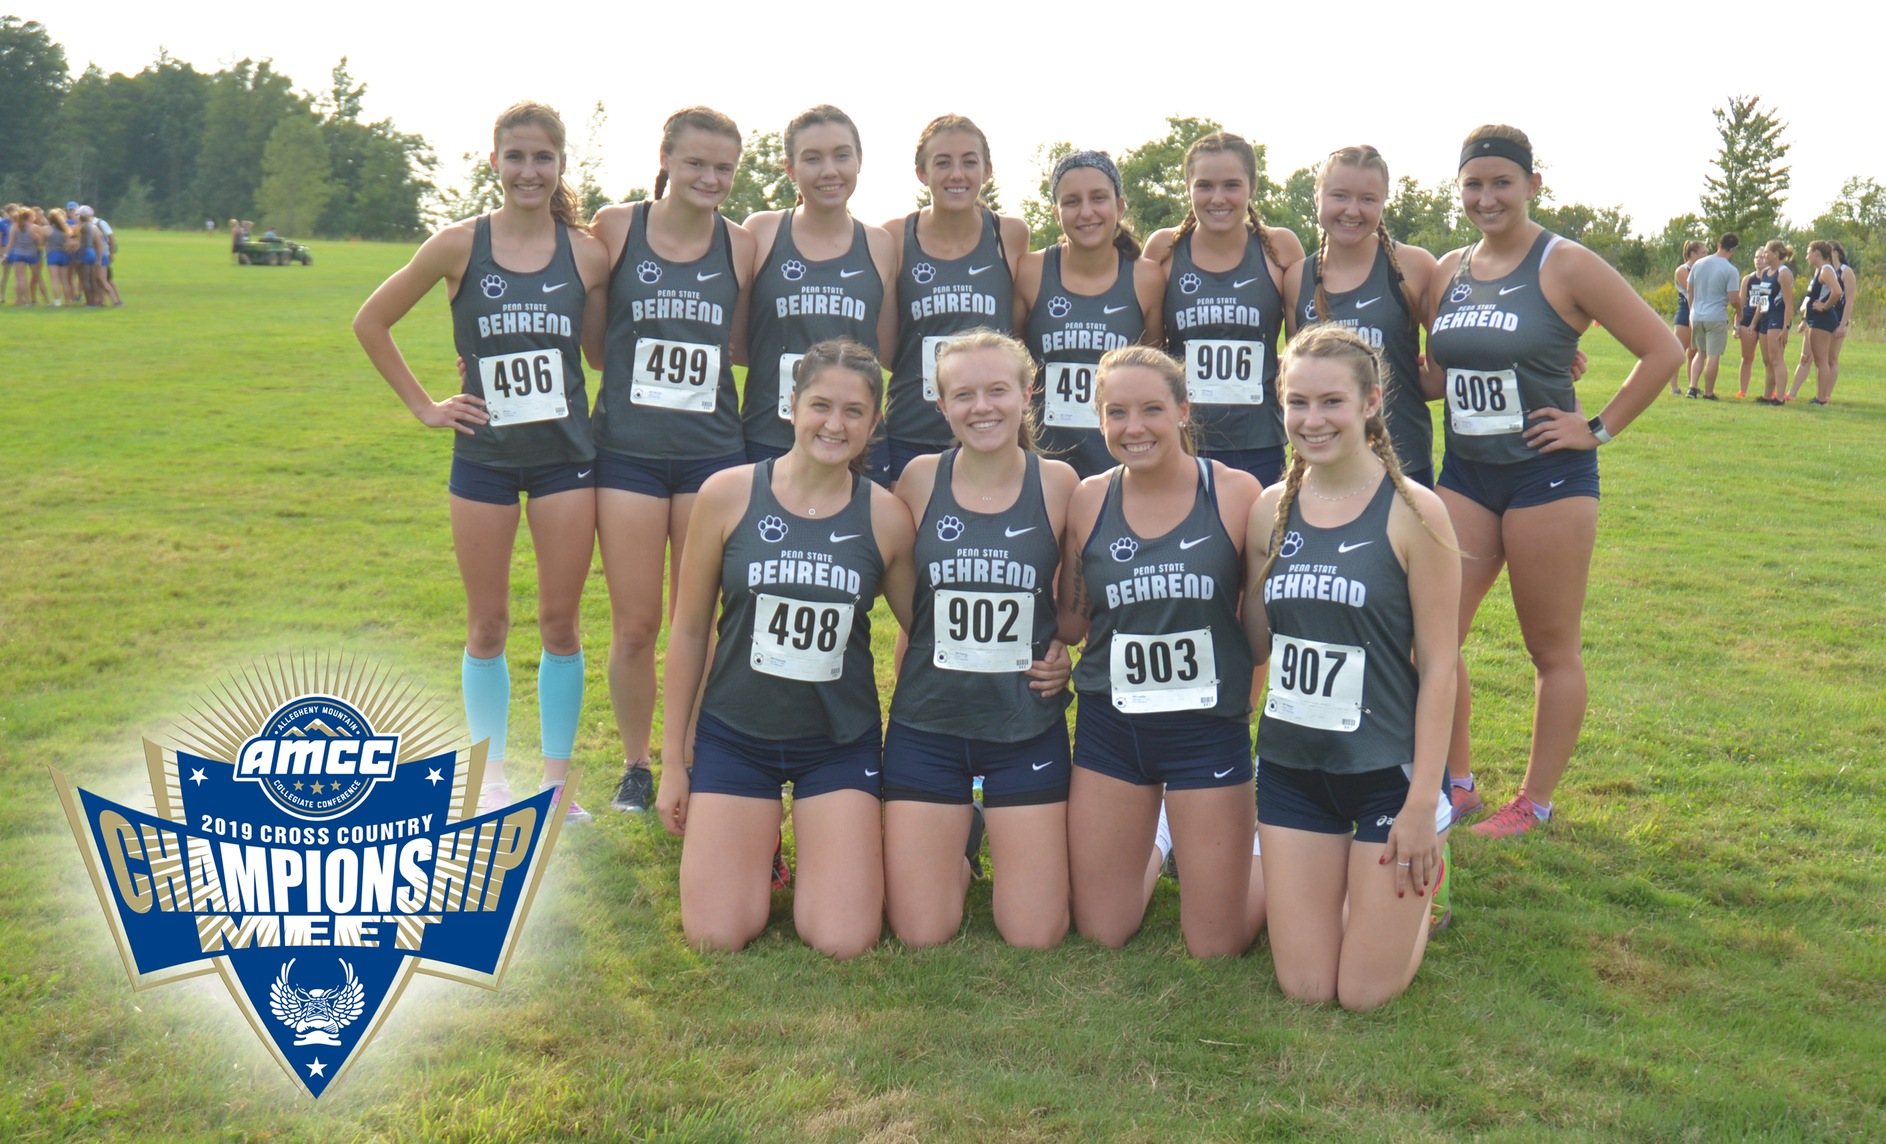 Women's Cross Country Set to Host AMCC Championship Saturday